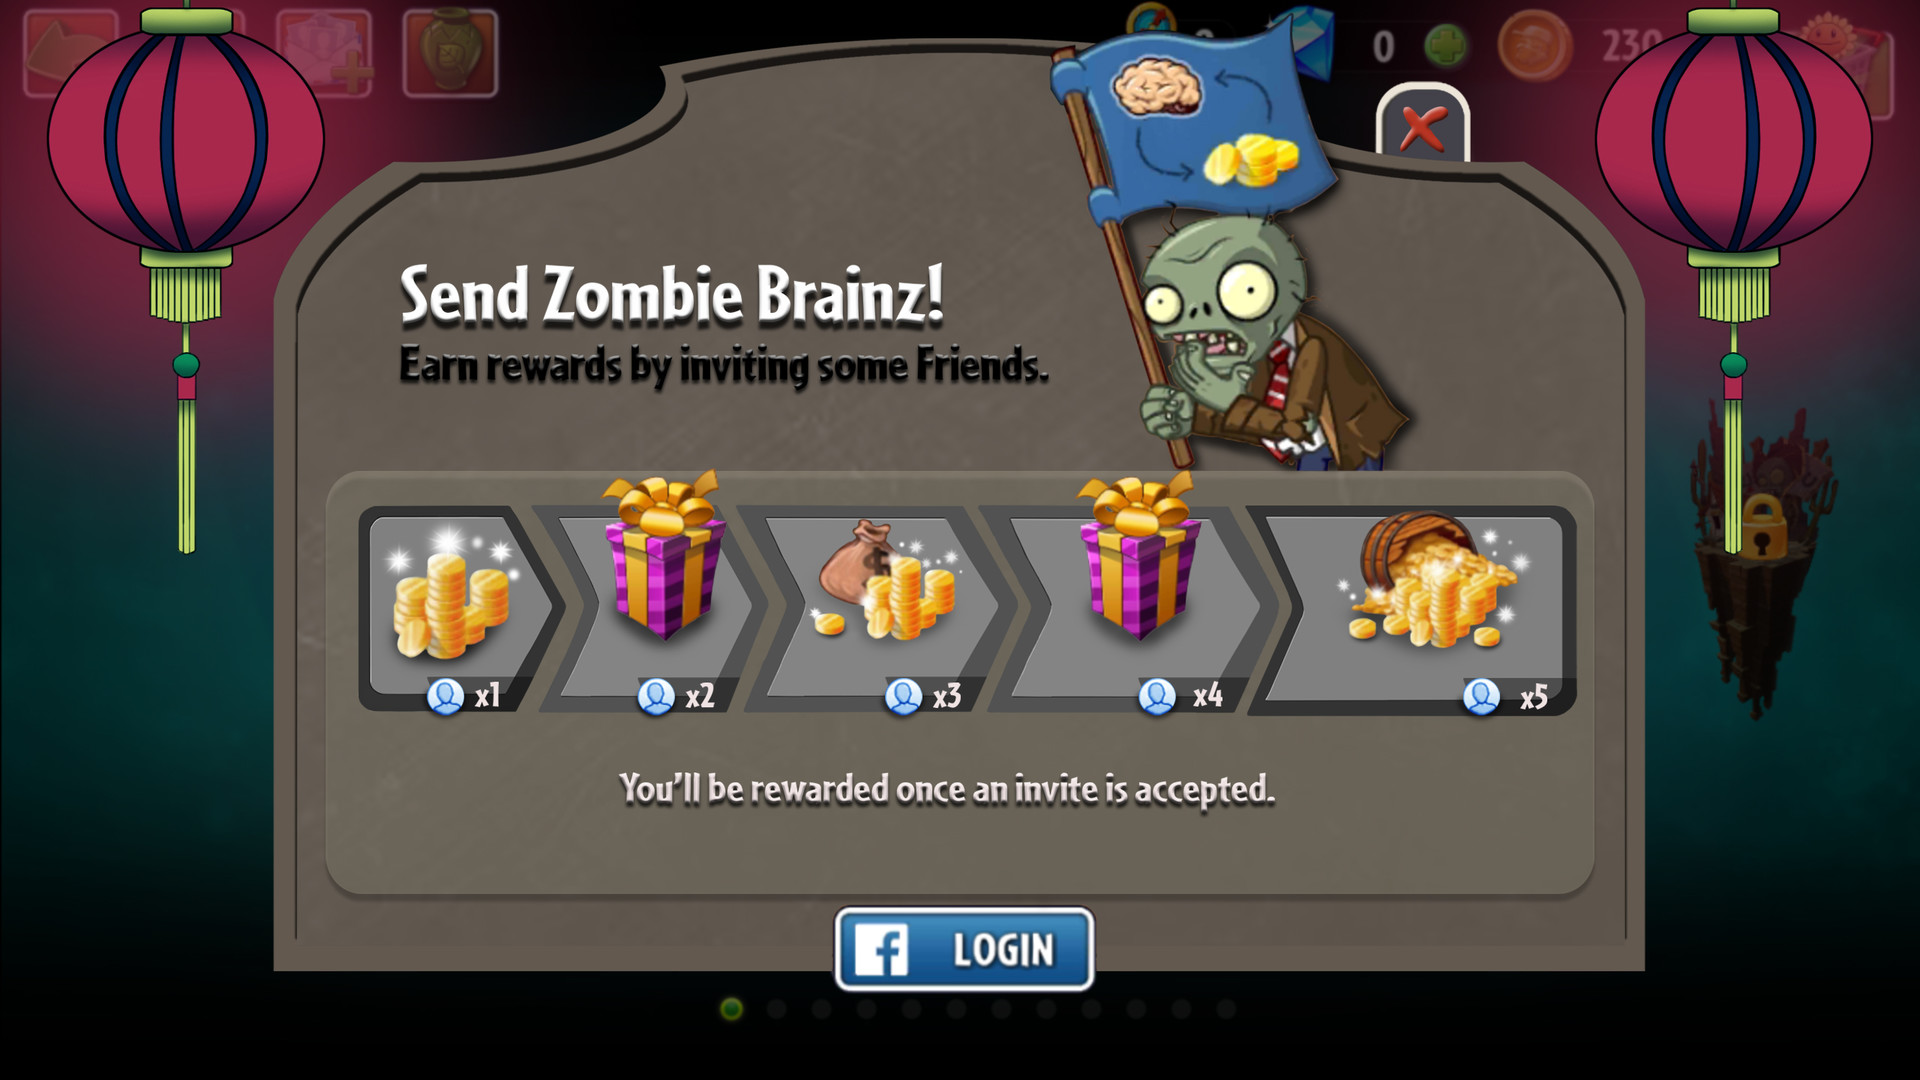 Avriel Lai - Plants vs. Zombies 2 - Chinese Hungry Ghost Festival Theme